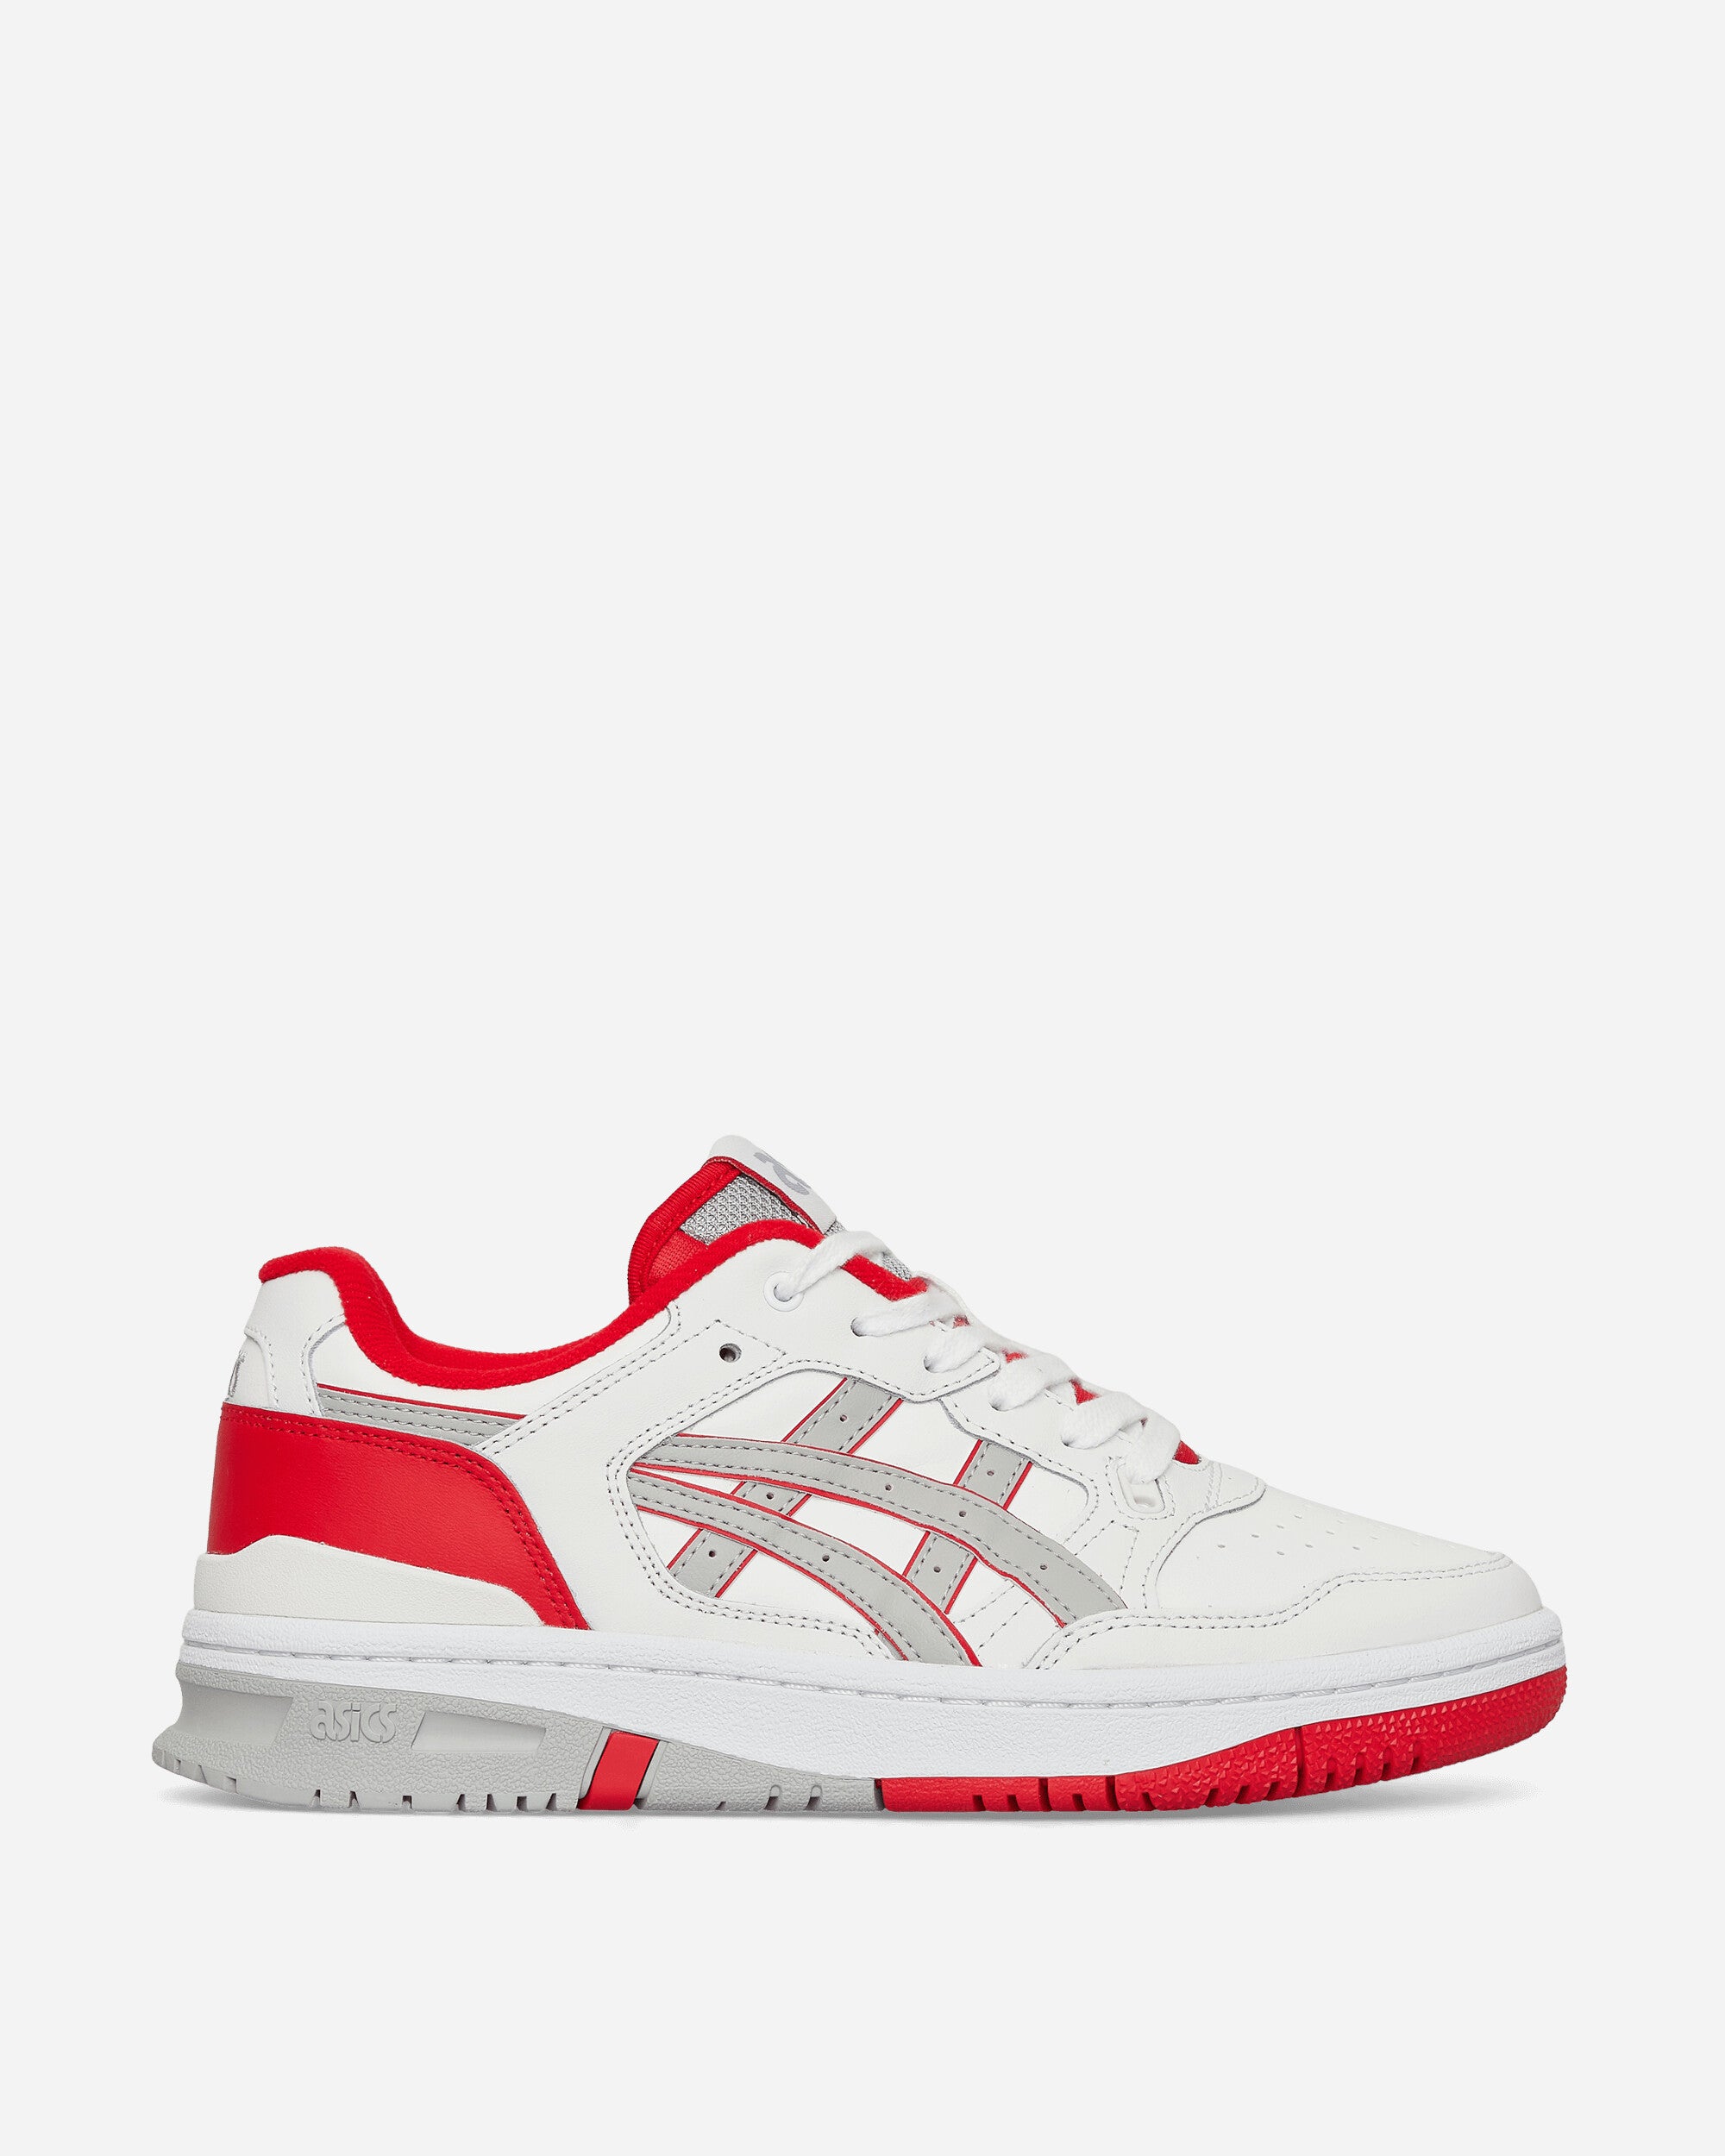 Asics Ex89 White/Classic Red Sneakers Low 1201A476-111